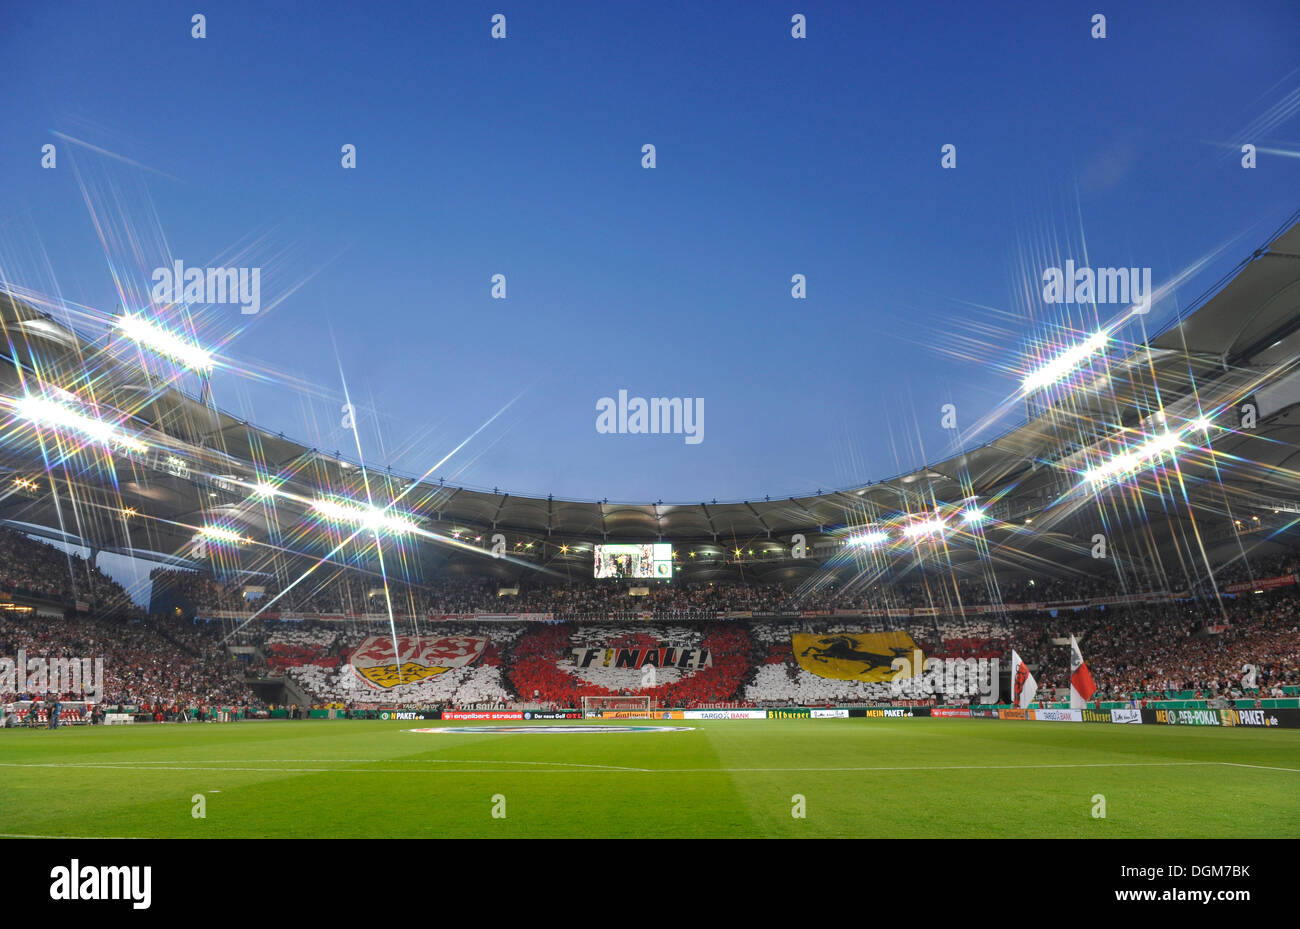 Fan action during the DFB semi-final, blue hour, Mercedes-Benz Arena, Stuttgart, Baden-Württemberg, Germany Stock Photo